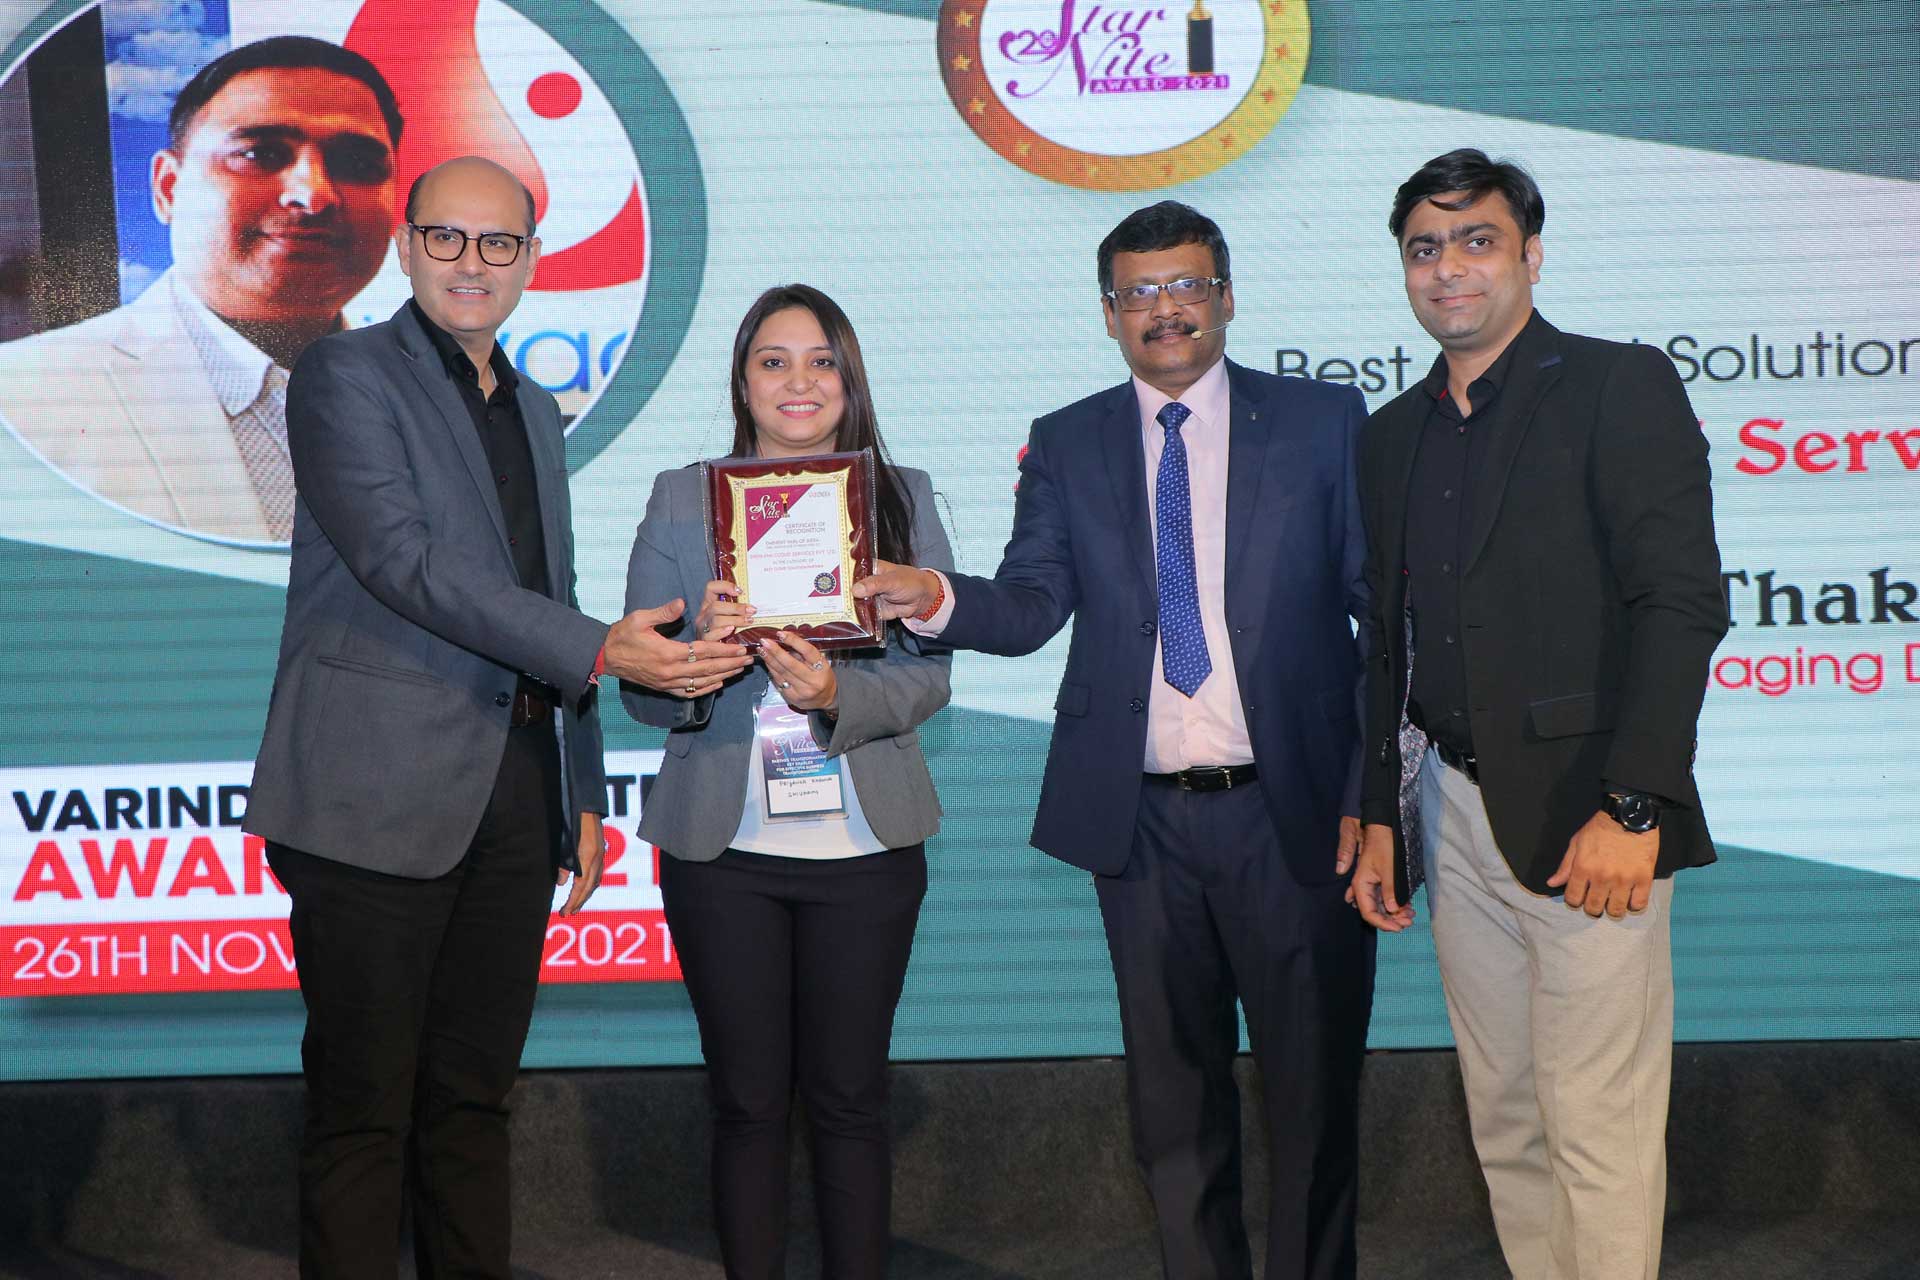 Best Cloud Solution Partner Award goes to Shivaami Cloud Services Pvt. Ltd.,  at 20th Star Nite Awards 2021